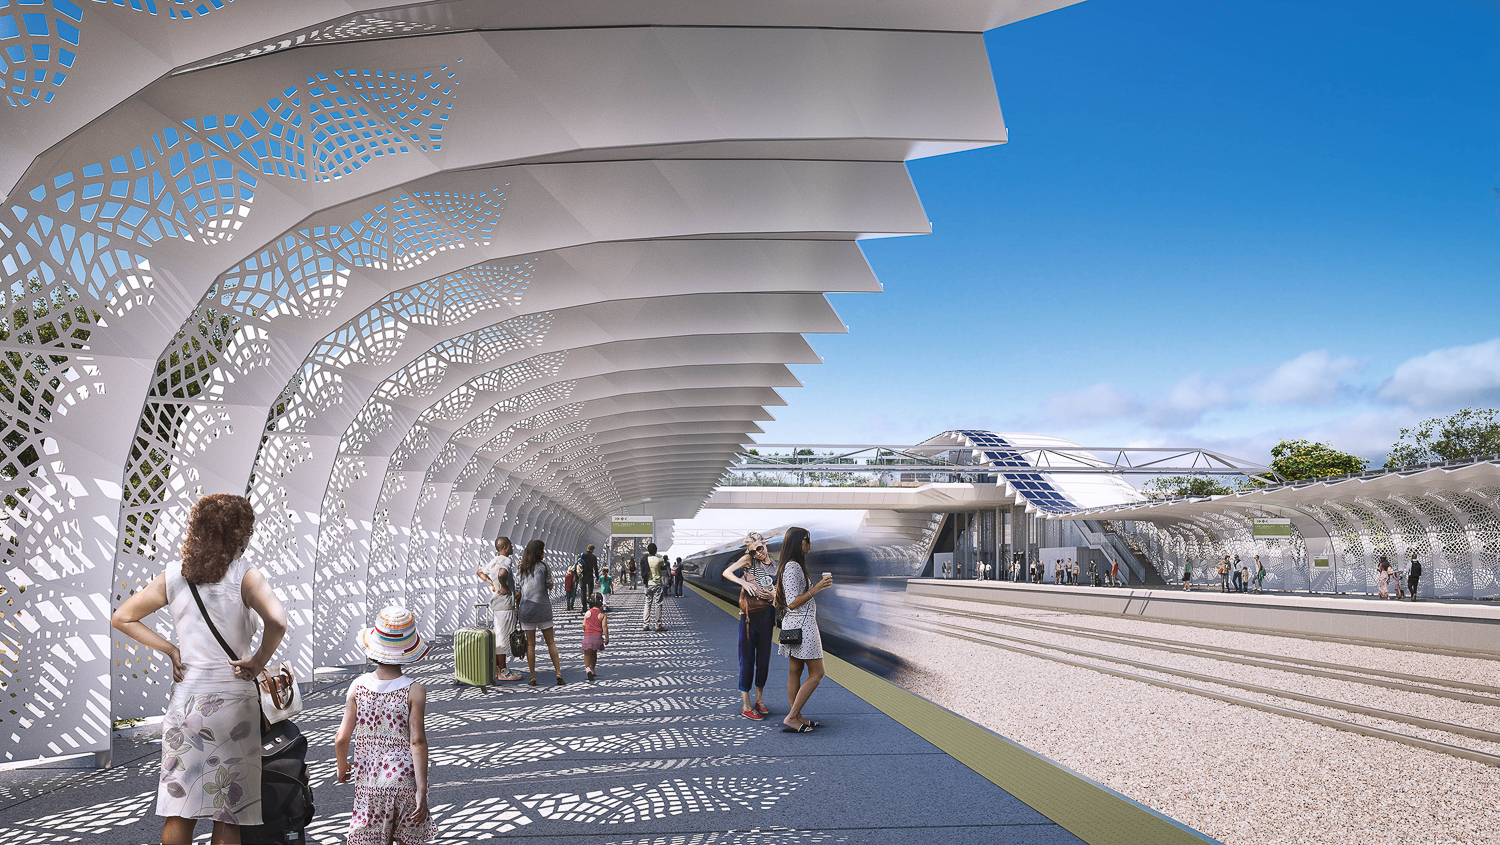 California High-Speed Rail, design by Foster and Partners rendering by Kilograph